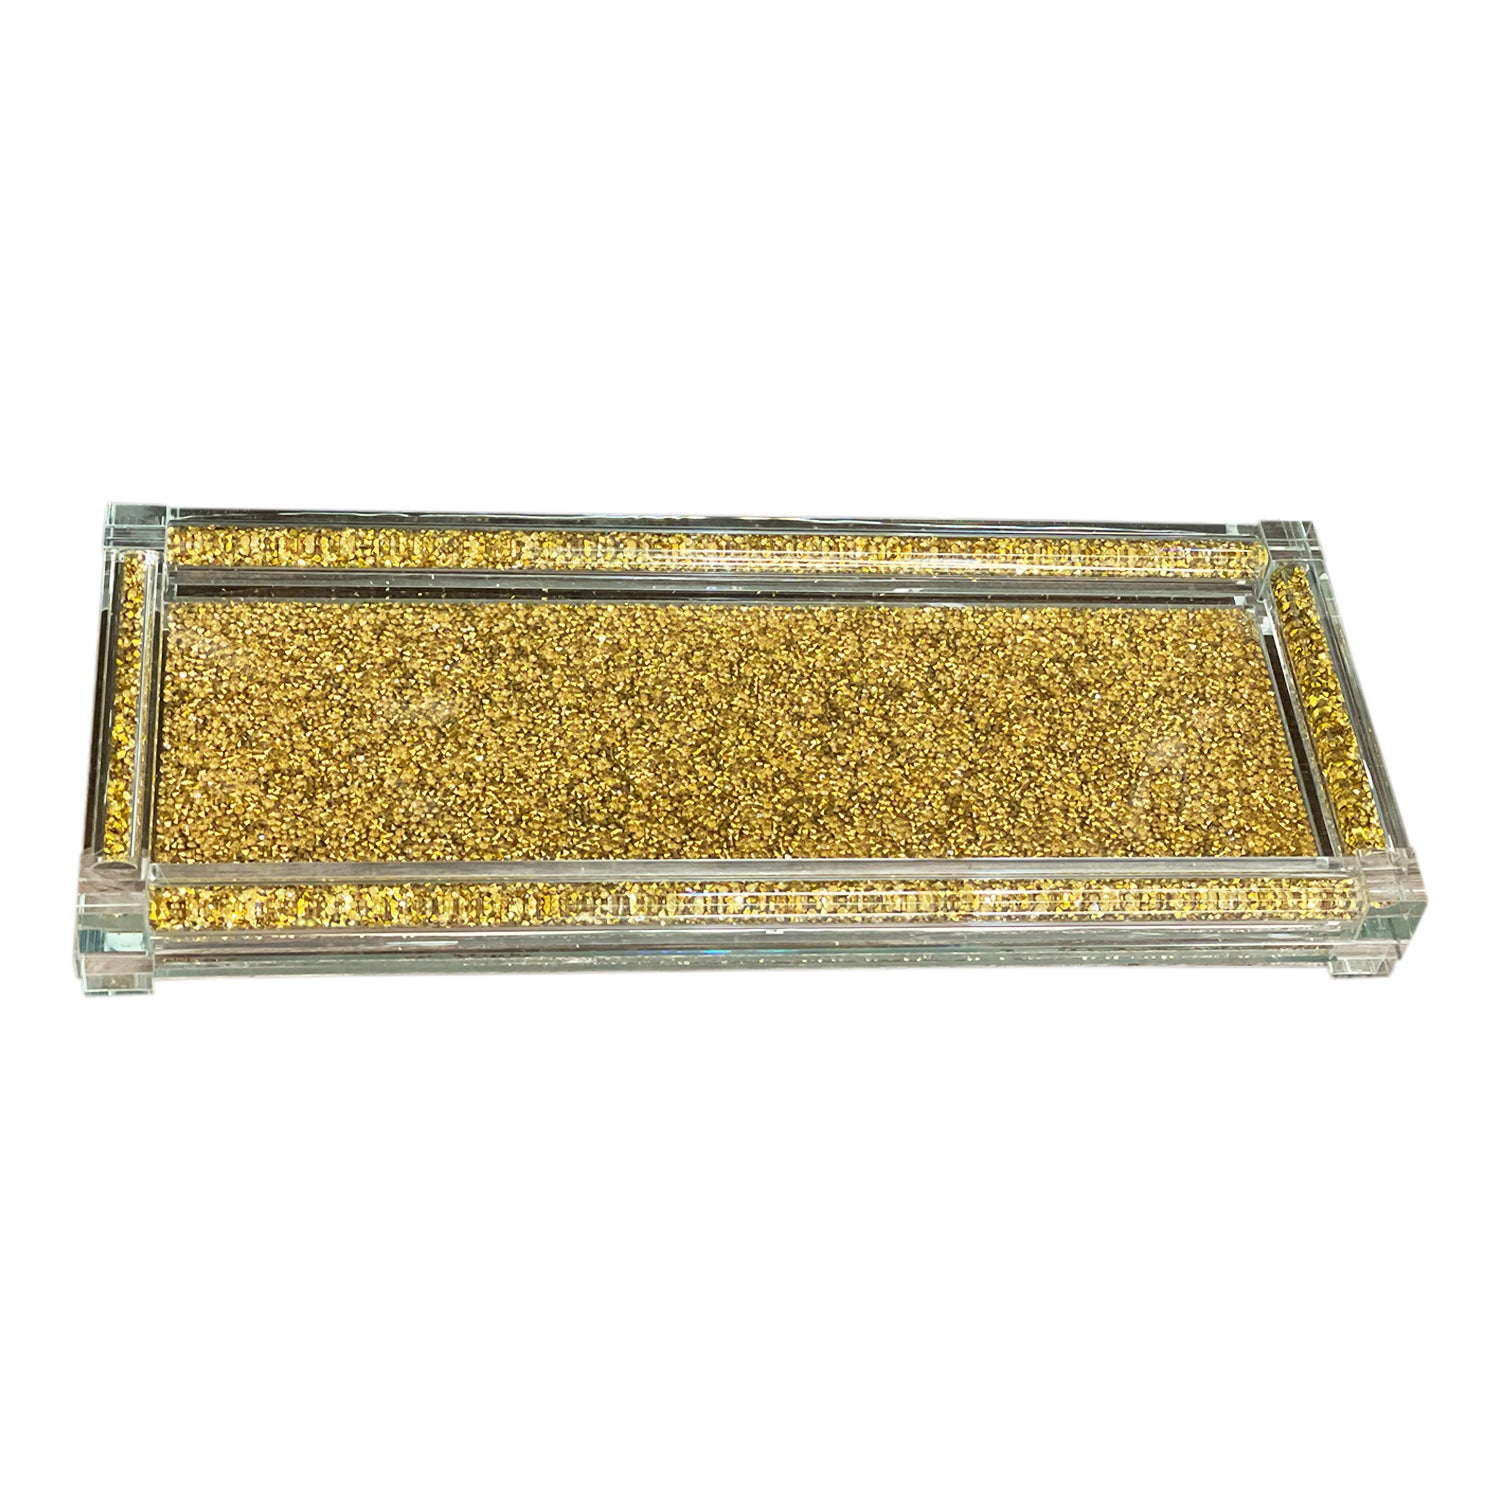 Ambrose Exquisite Three Glass Canister with Tray in gold-glass